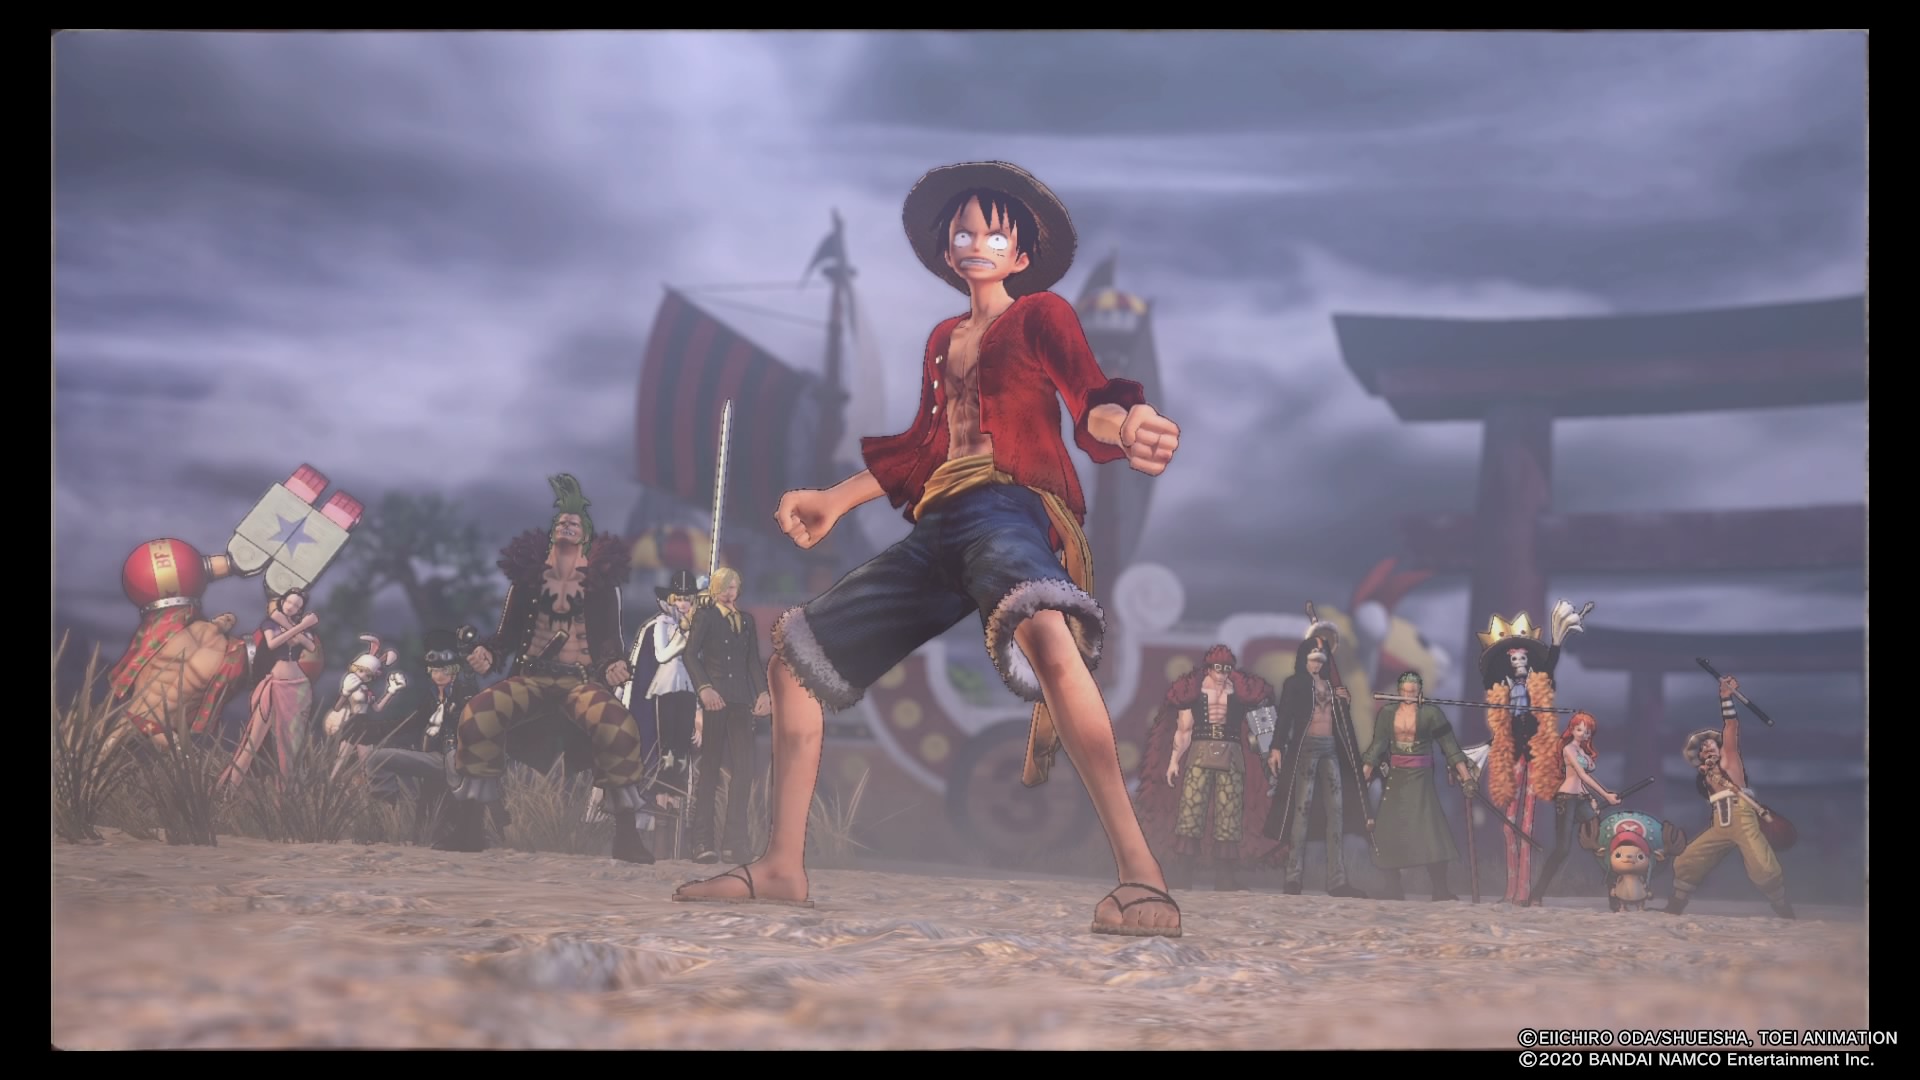 one-piece-pirate-warriors-4-set-for-new-dlc-characters-starting-this